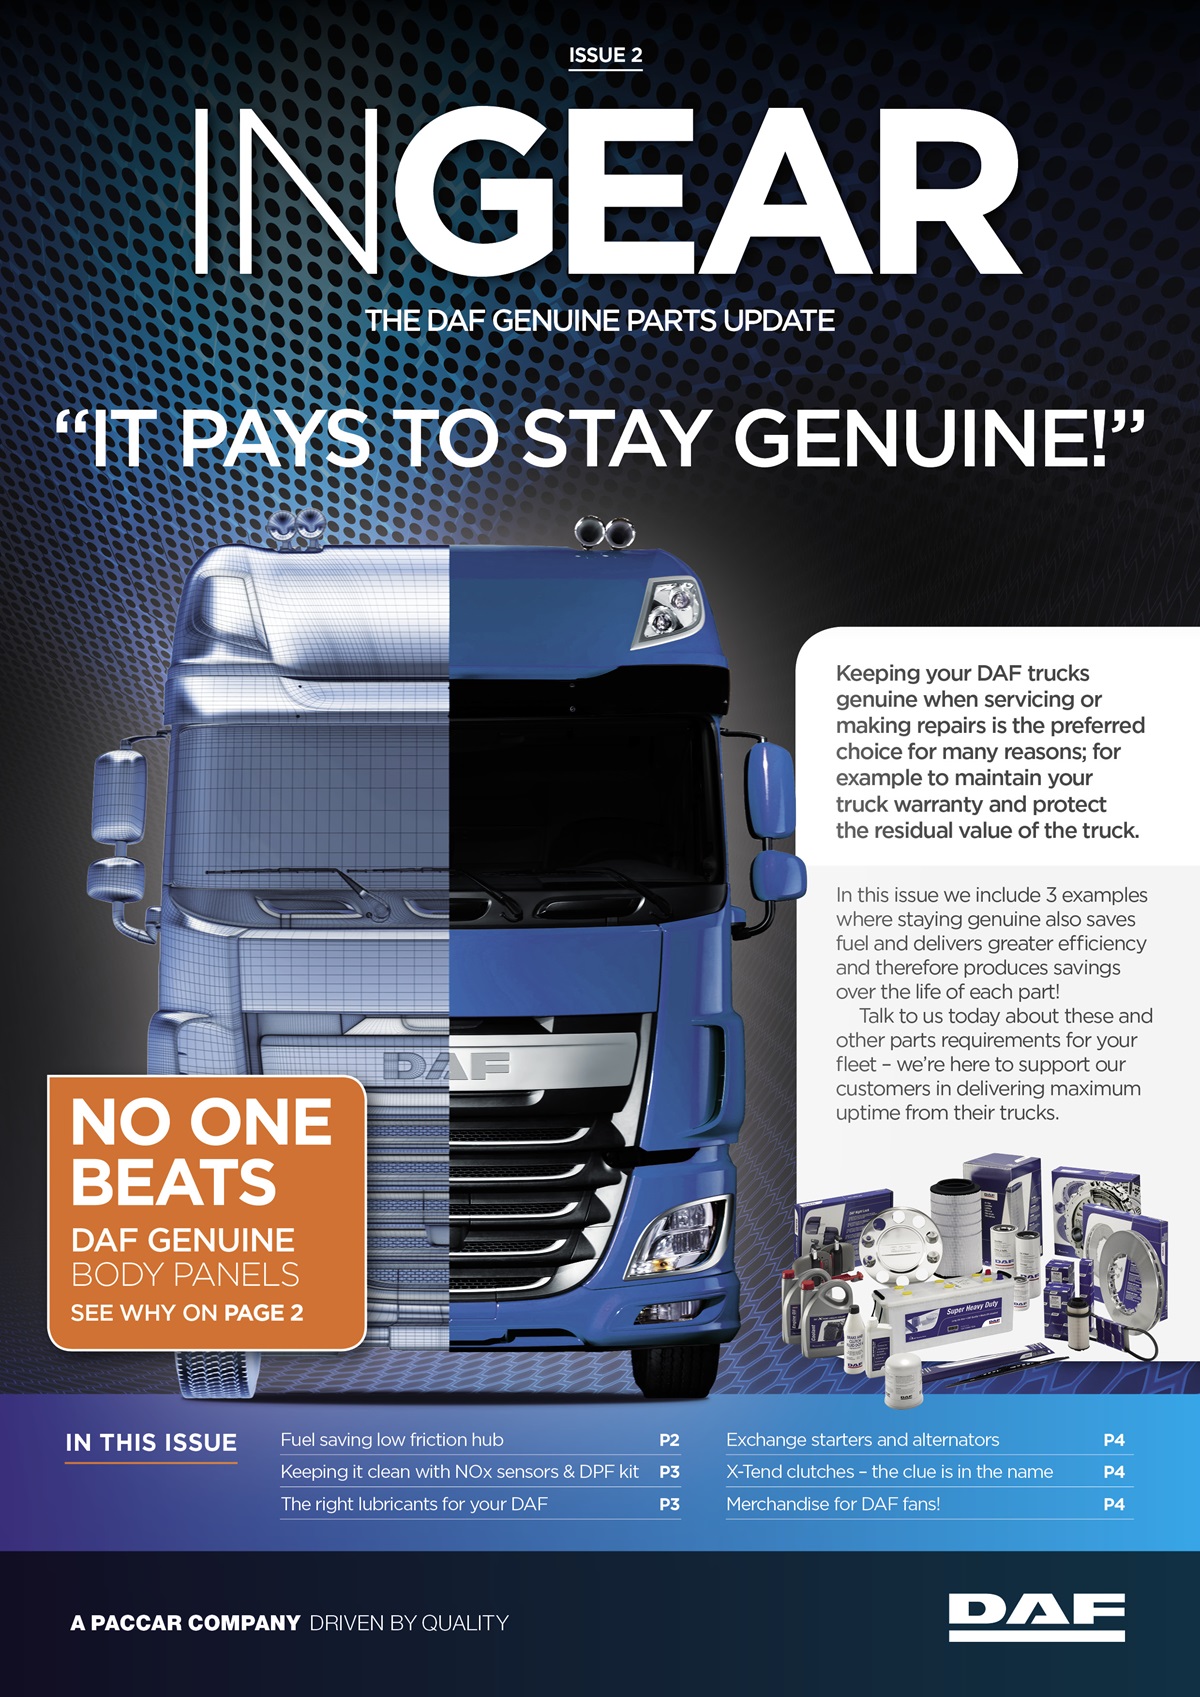 New Complete hub kit underlines why it pays to stay DAF genuine